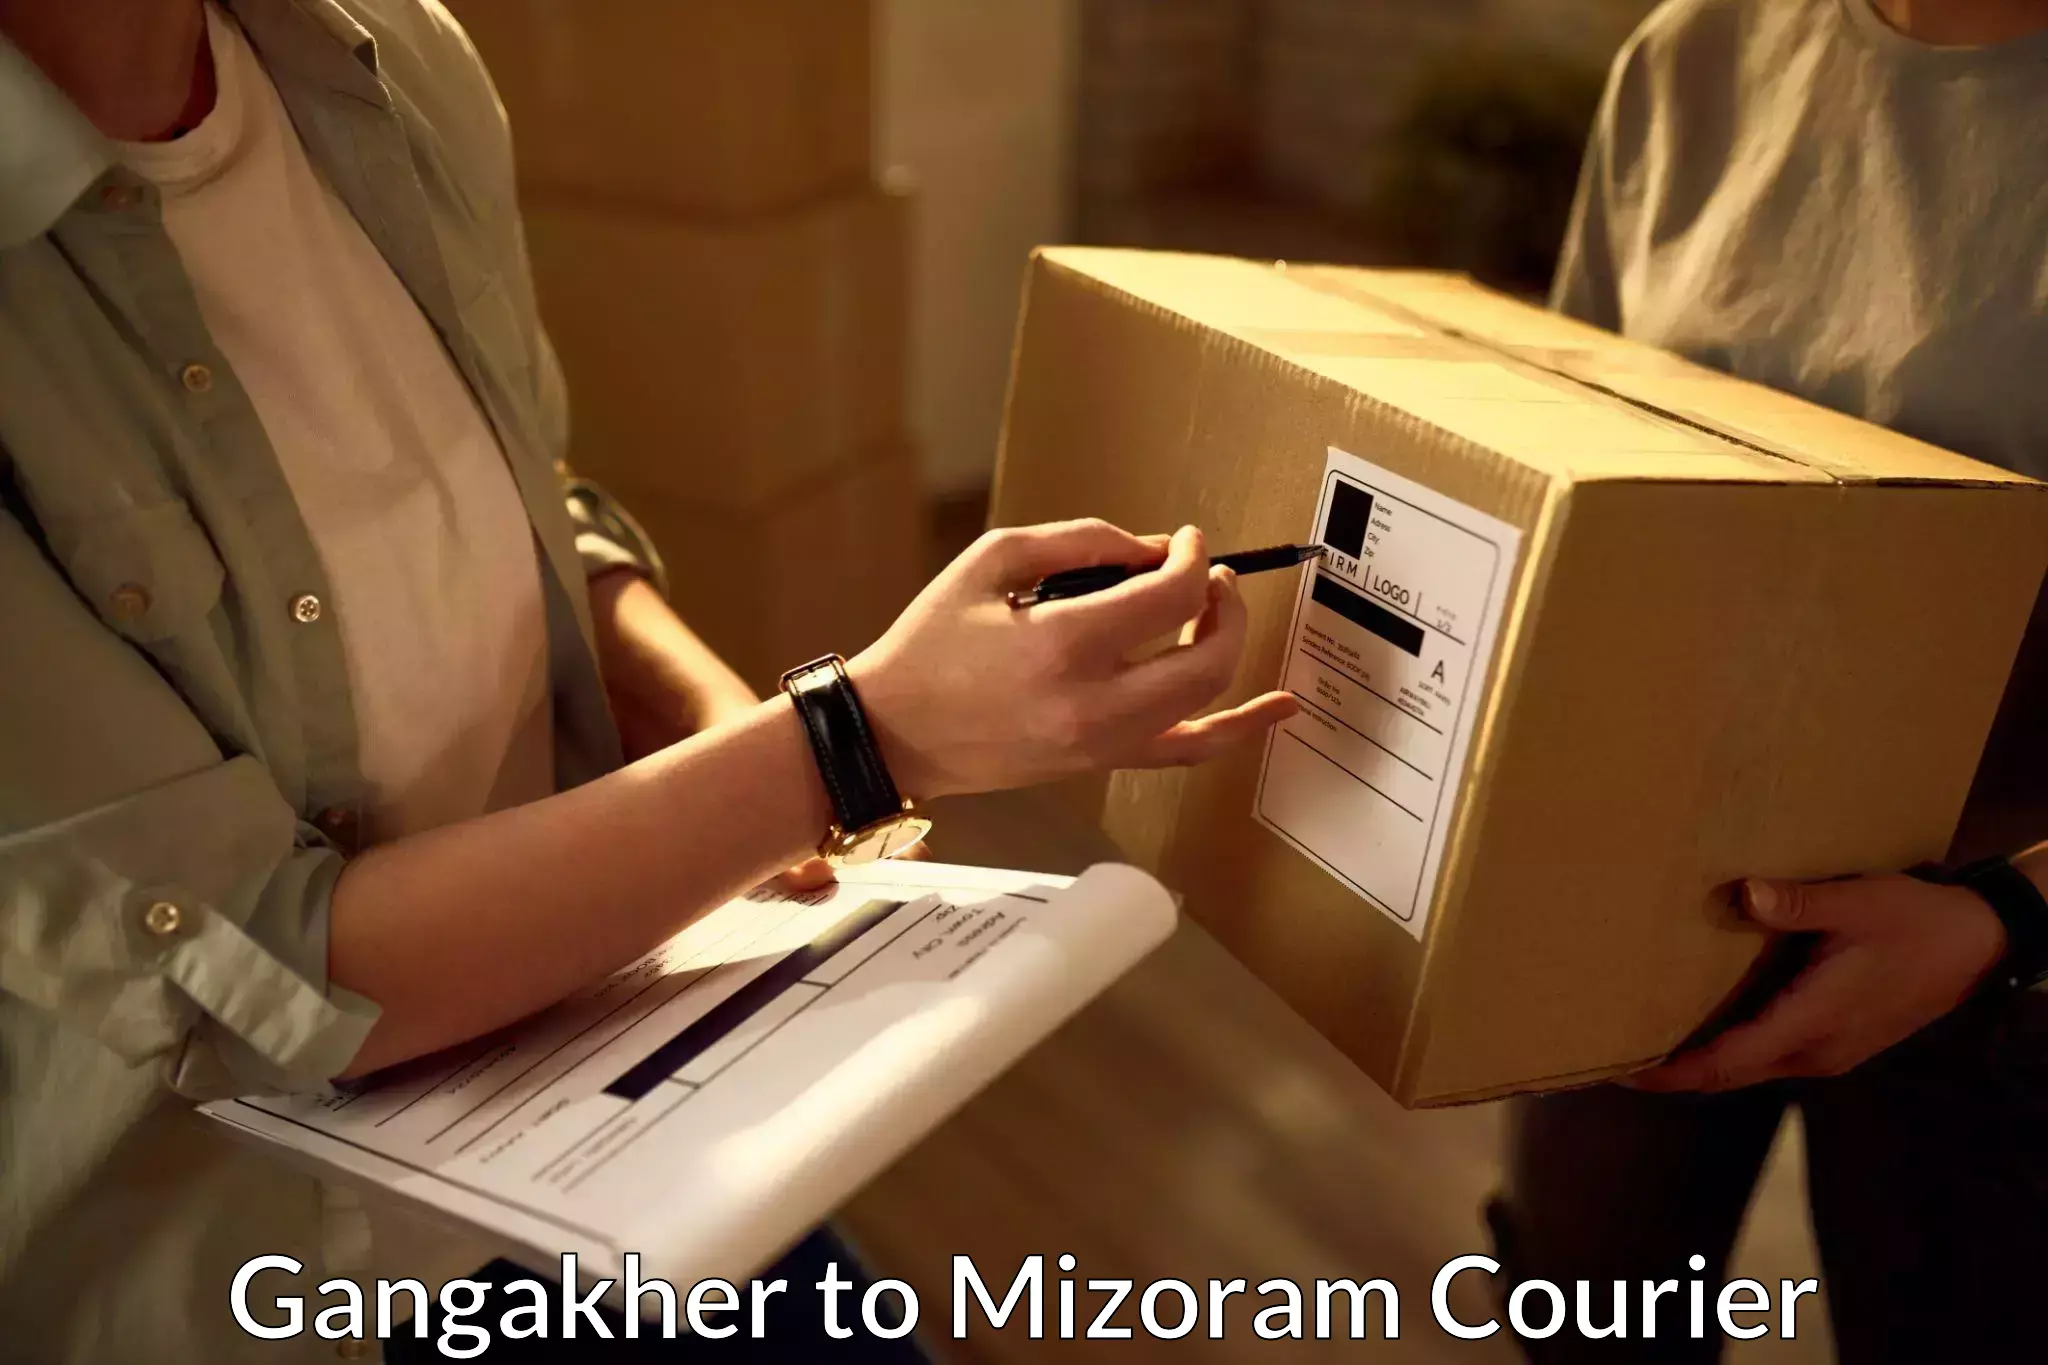 Express package services Gangakher to Mizoram